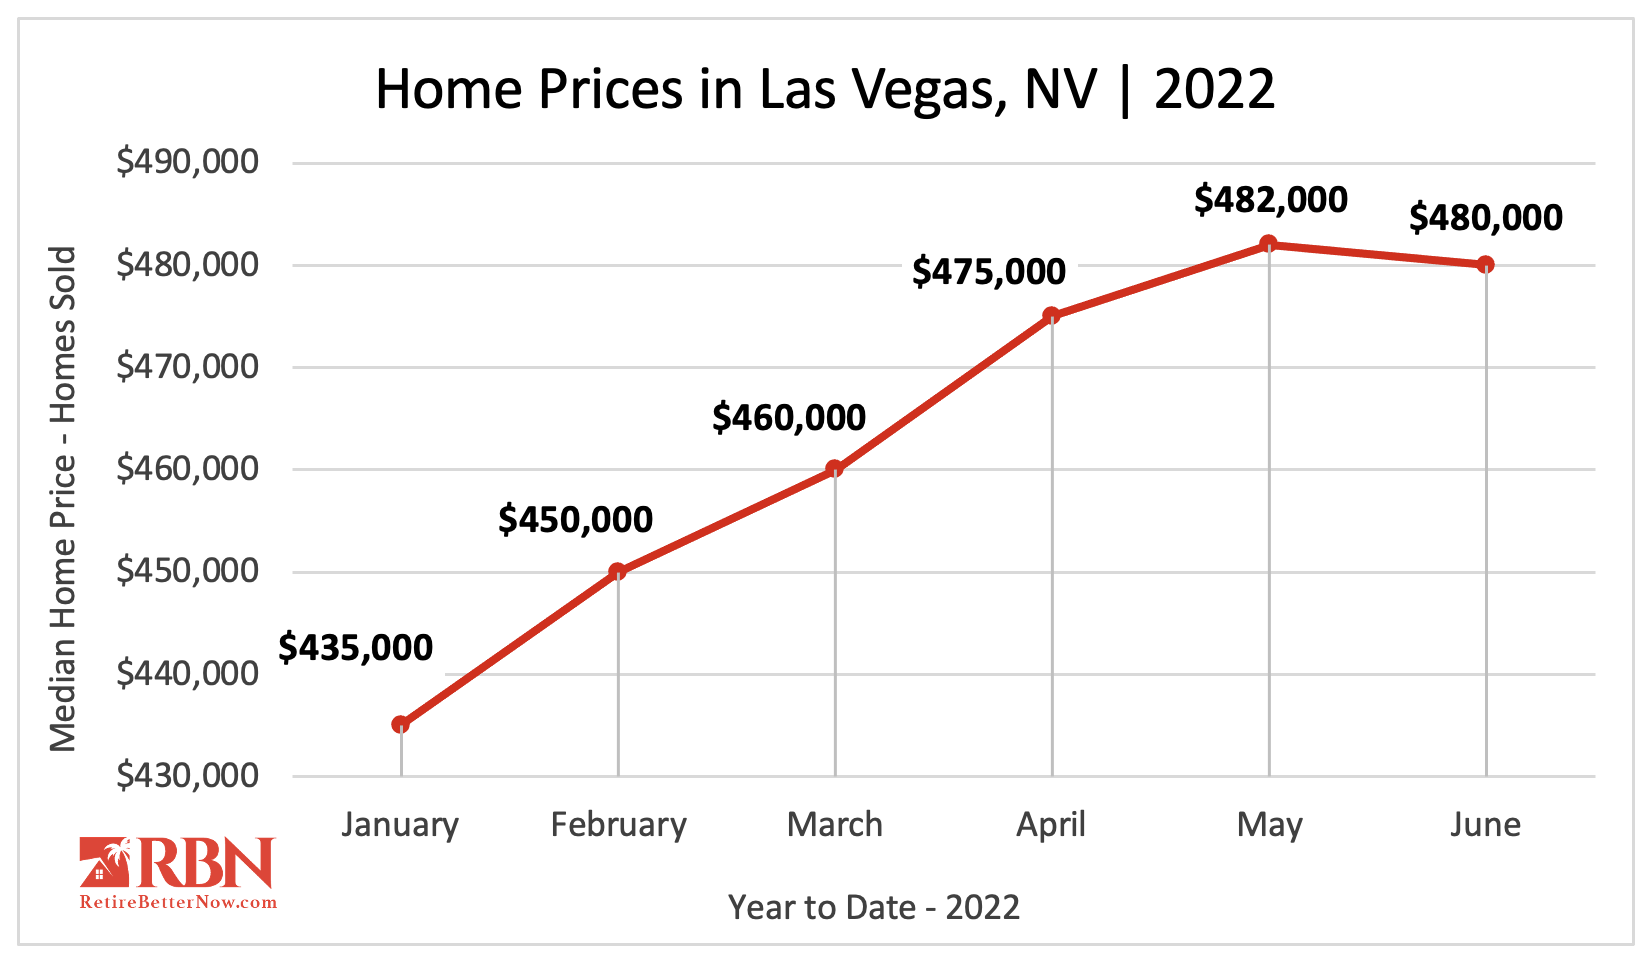 Home Prices in Las Vegas, NV